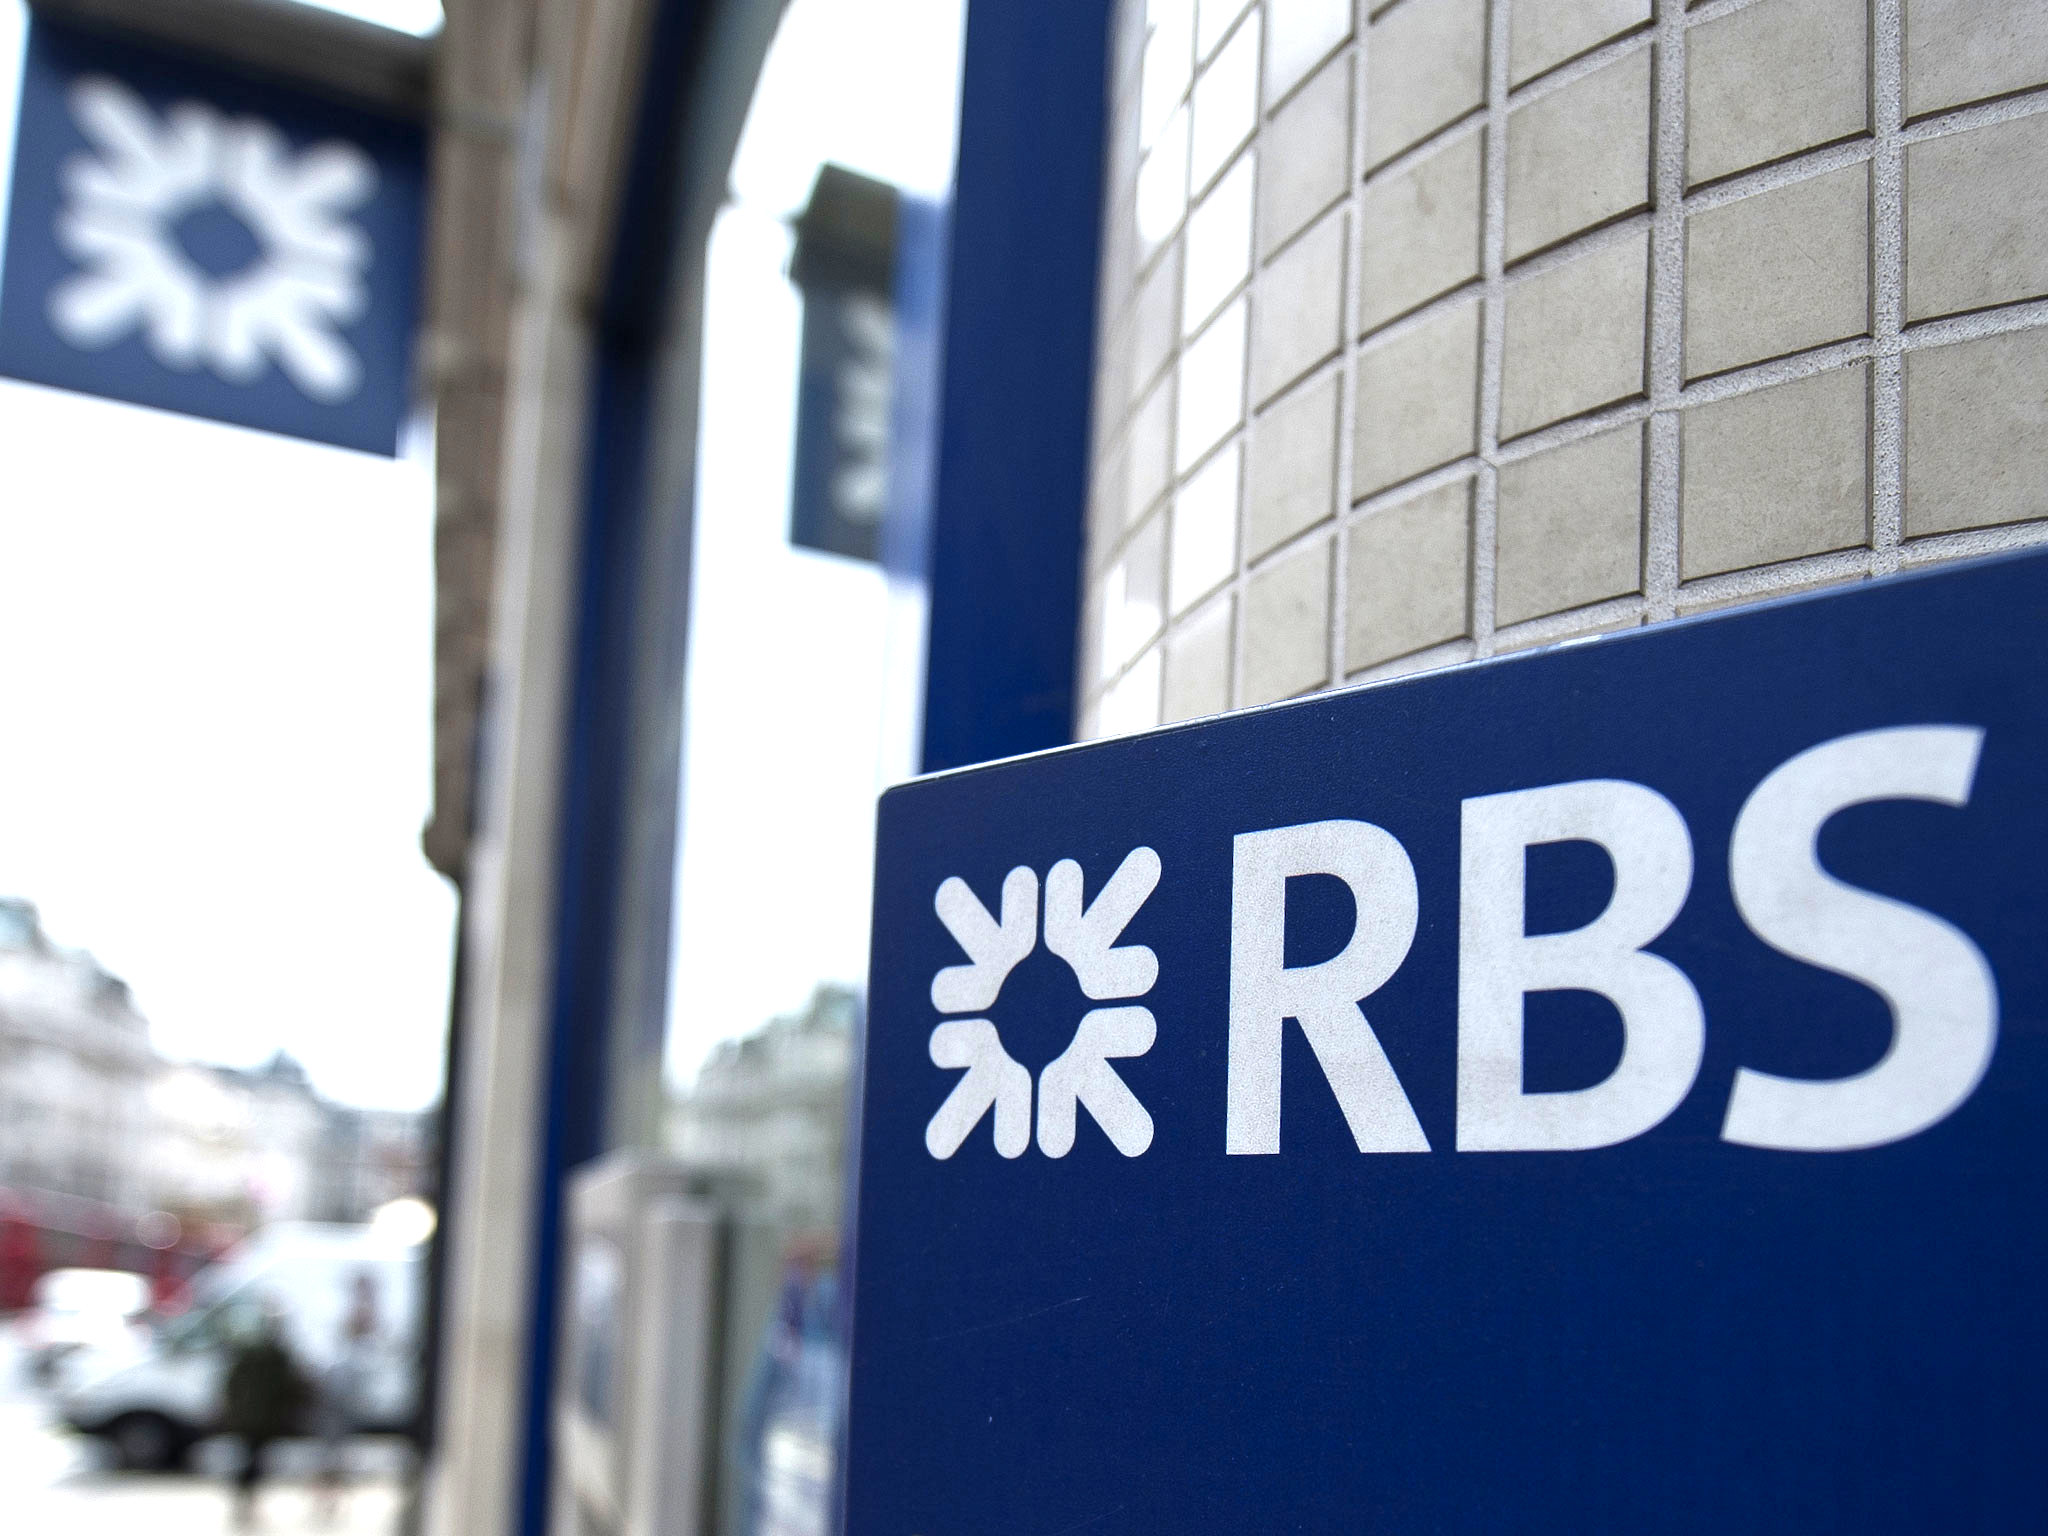 Royal Bank of Scotland is struggling to sell 300 branches